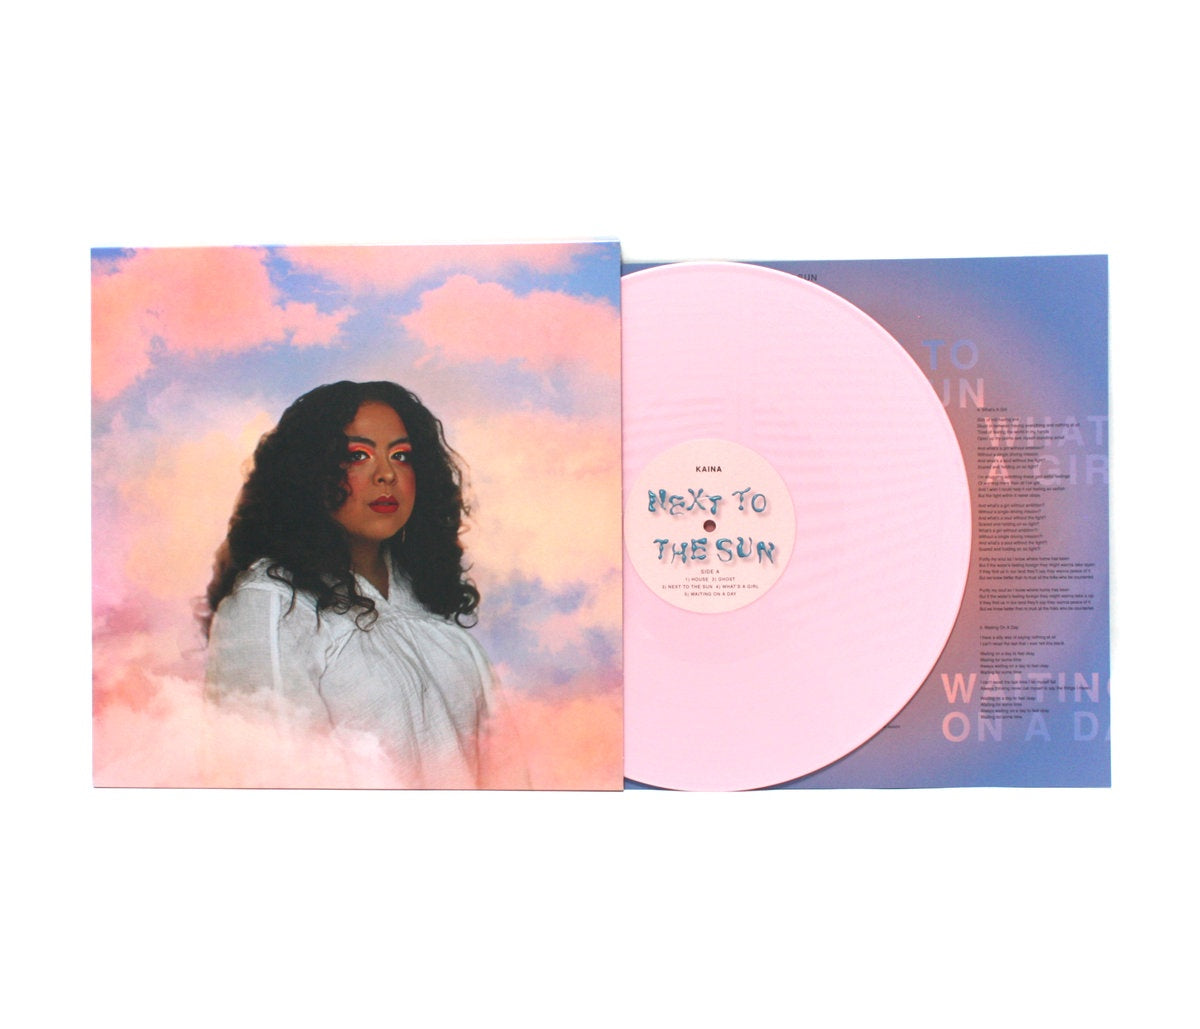 KAINA - Next to The Sun - New LP Record 2019  Limited Edition Pink Vinyl - Chicago Neo-Soul / RnB Pop